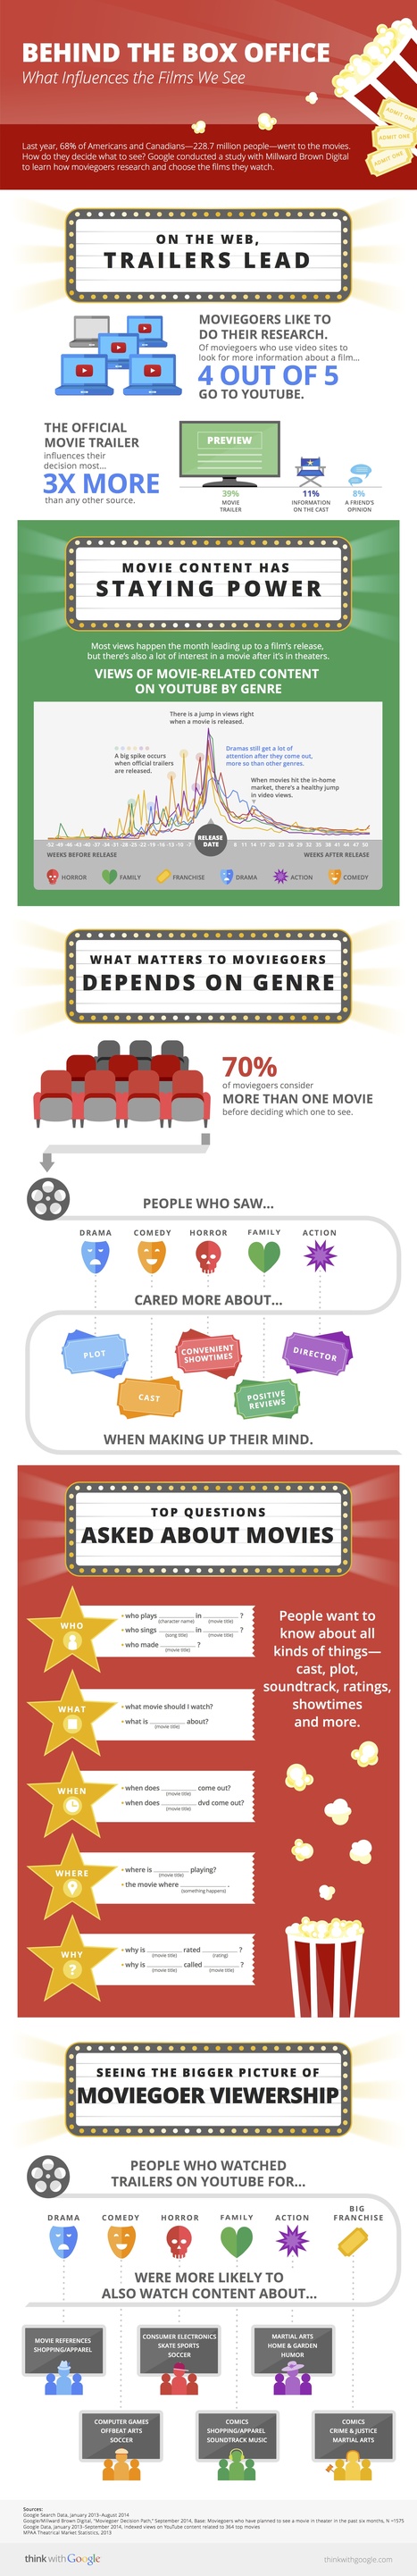 Infographic: How People Decide What Movies to See | Education 2.0 & 3.0 | Scoop.it